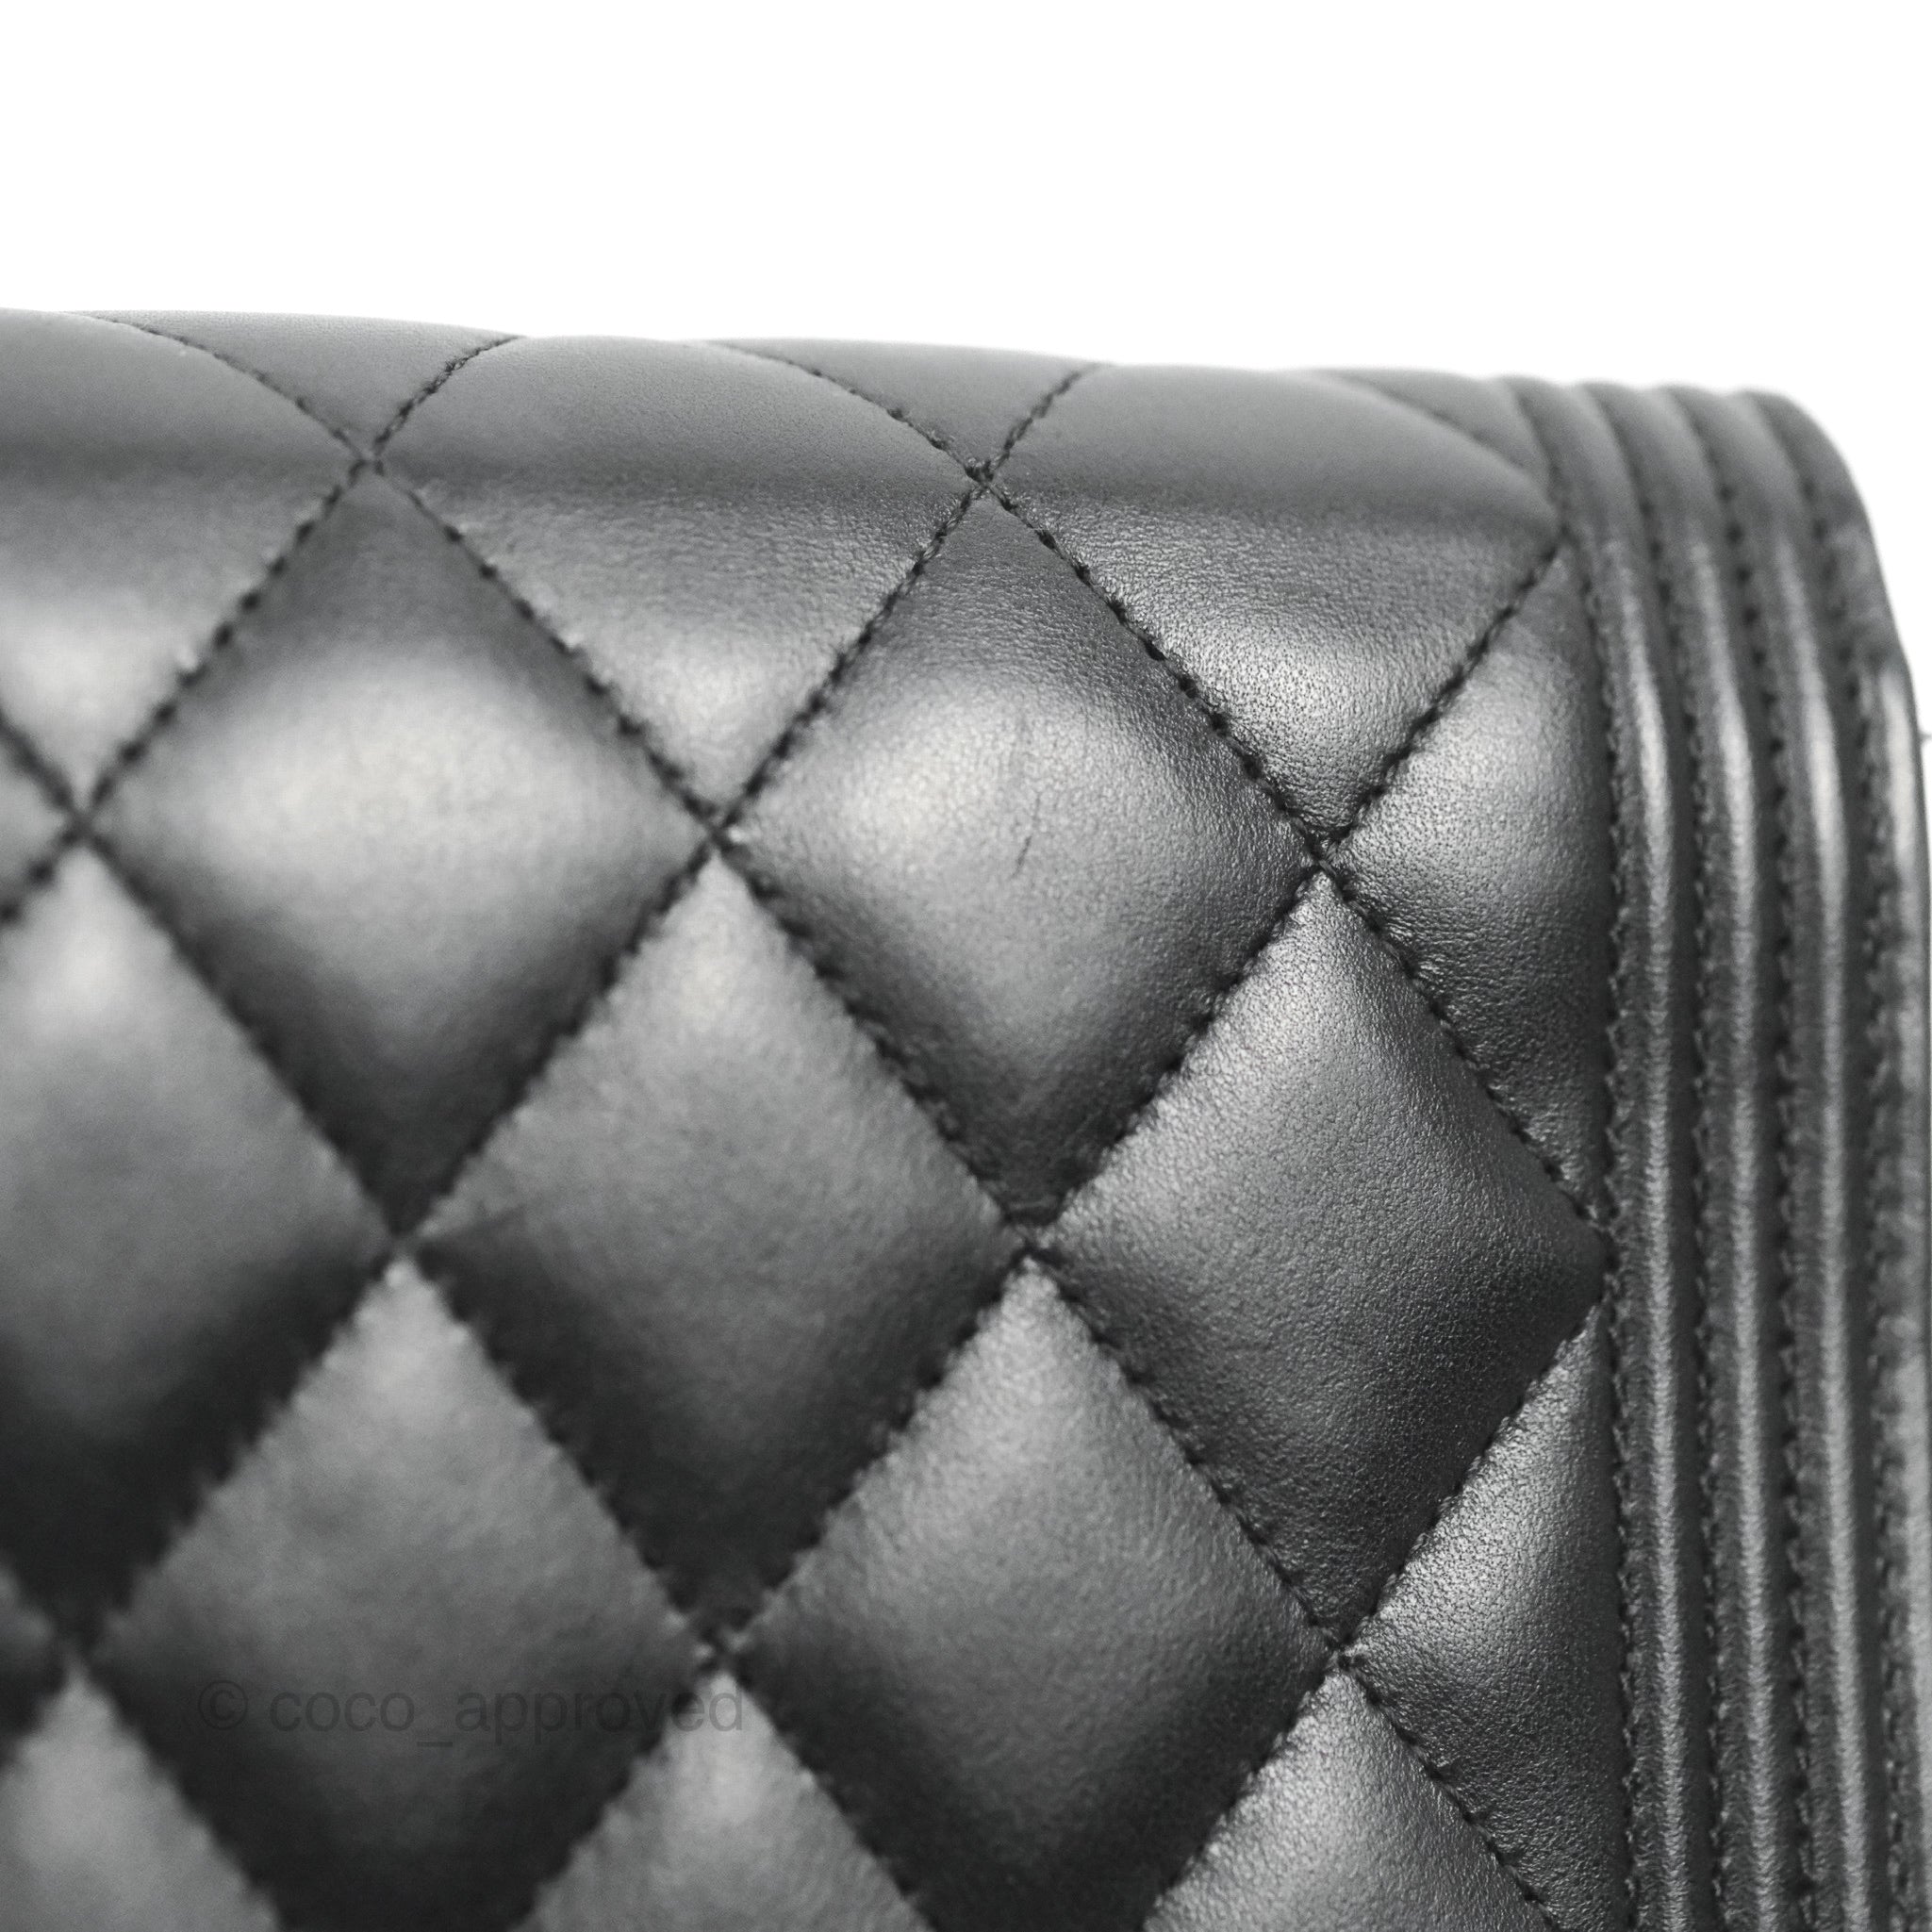 CHANEL Caviar Quilted Boy Wallet On Chain WOC Black 230591